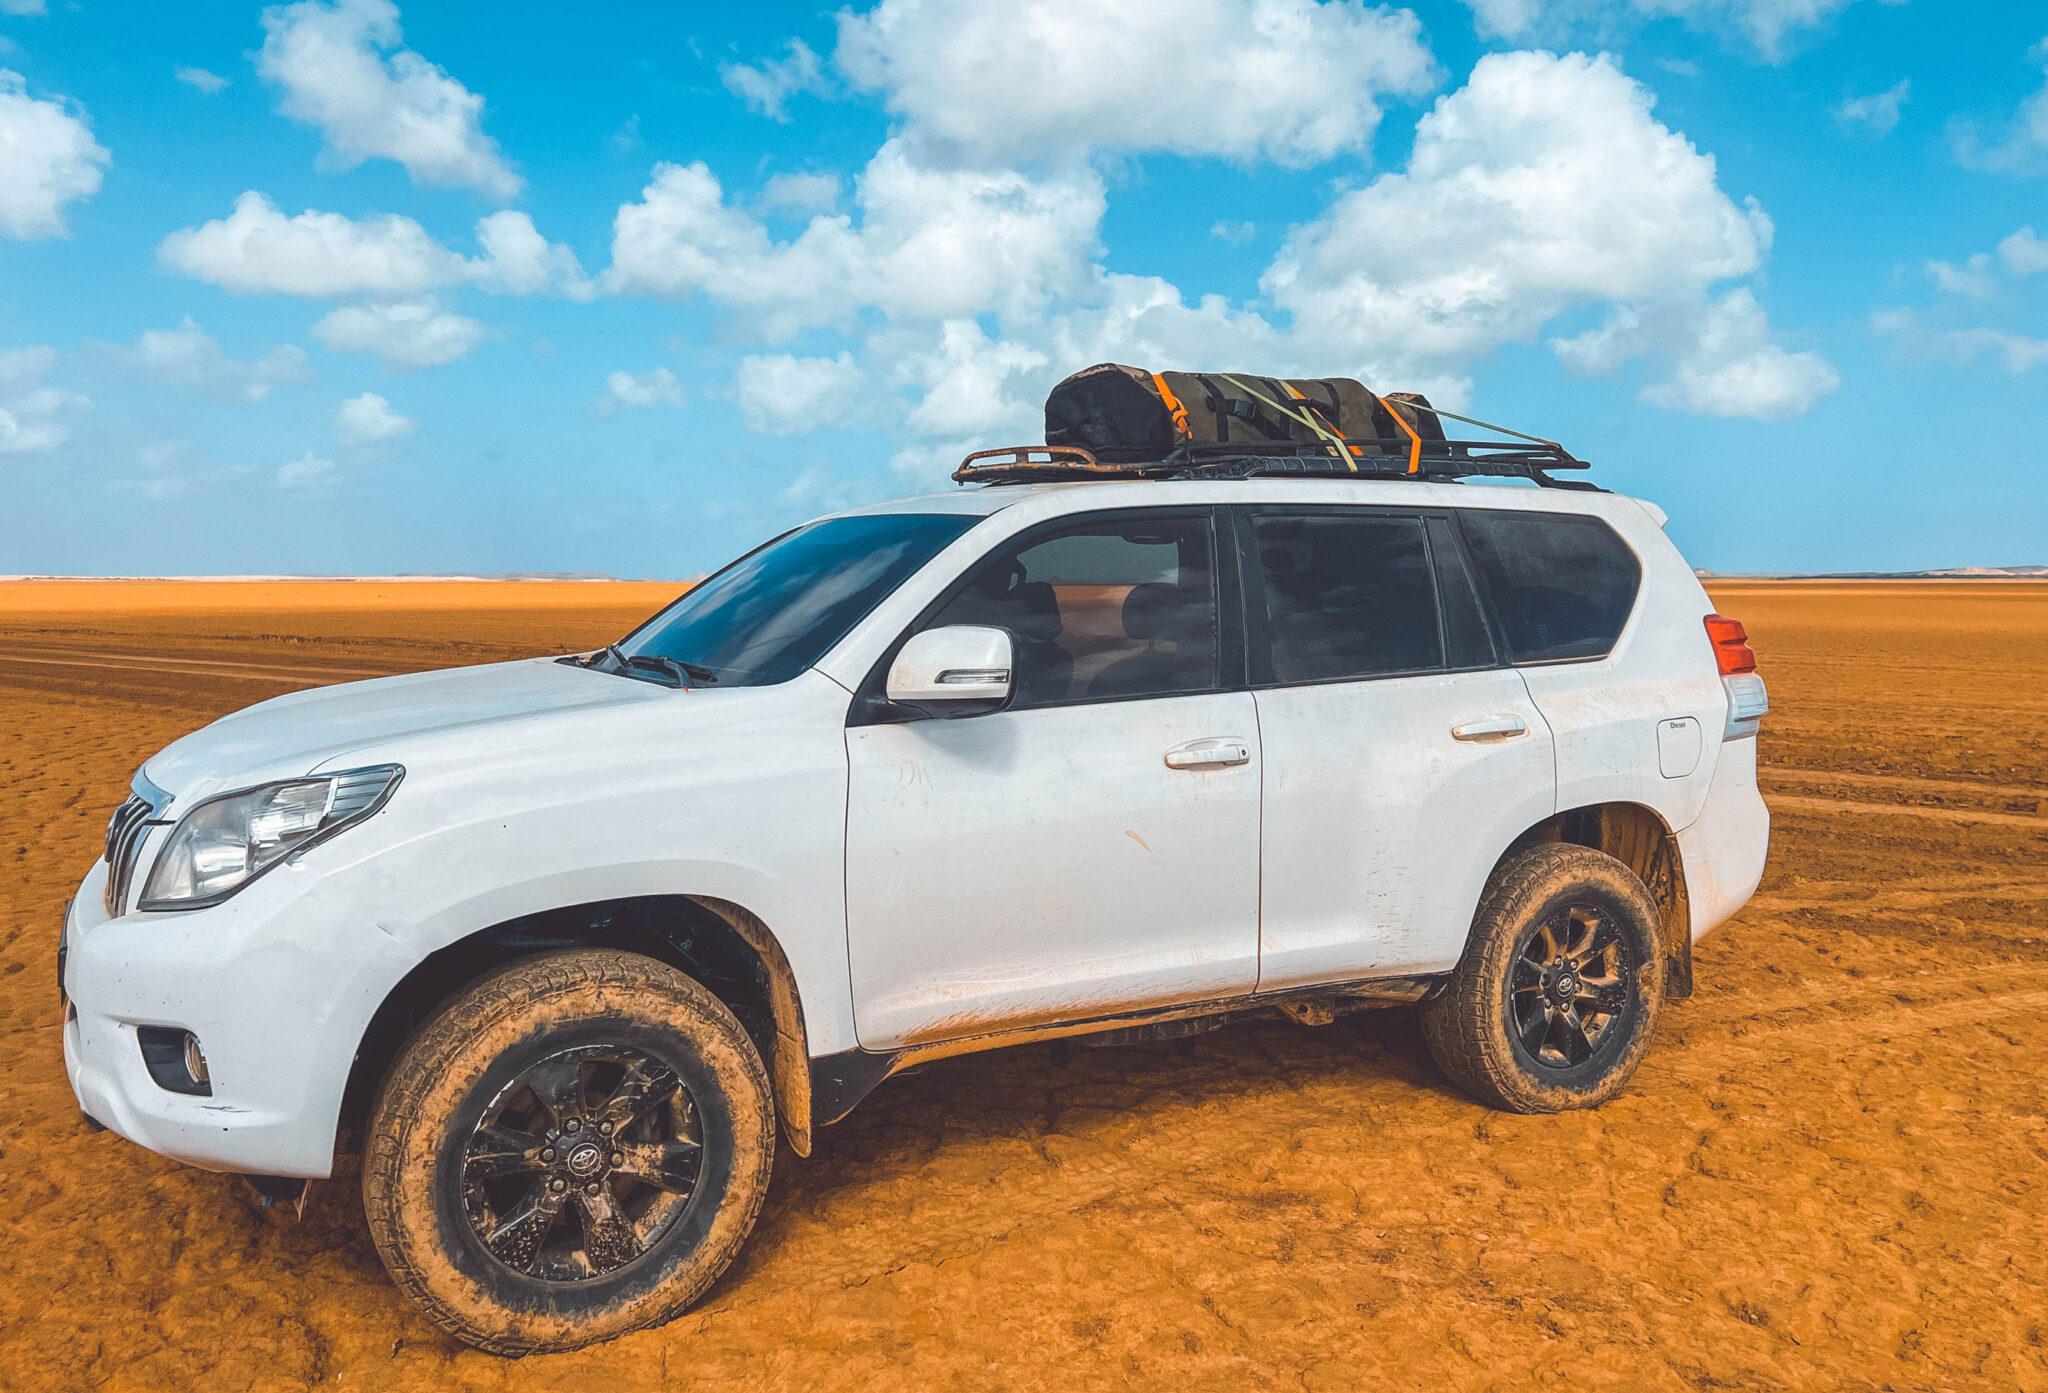 Toyota Land Cruiser with kite bag on roof while kitesurfing Colombia